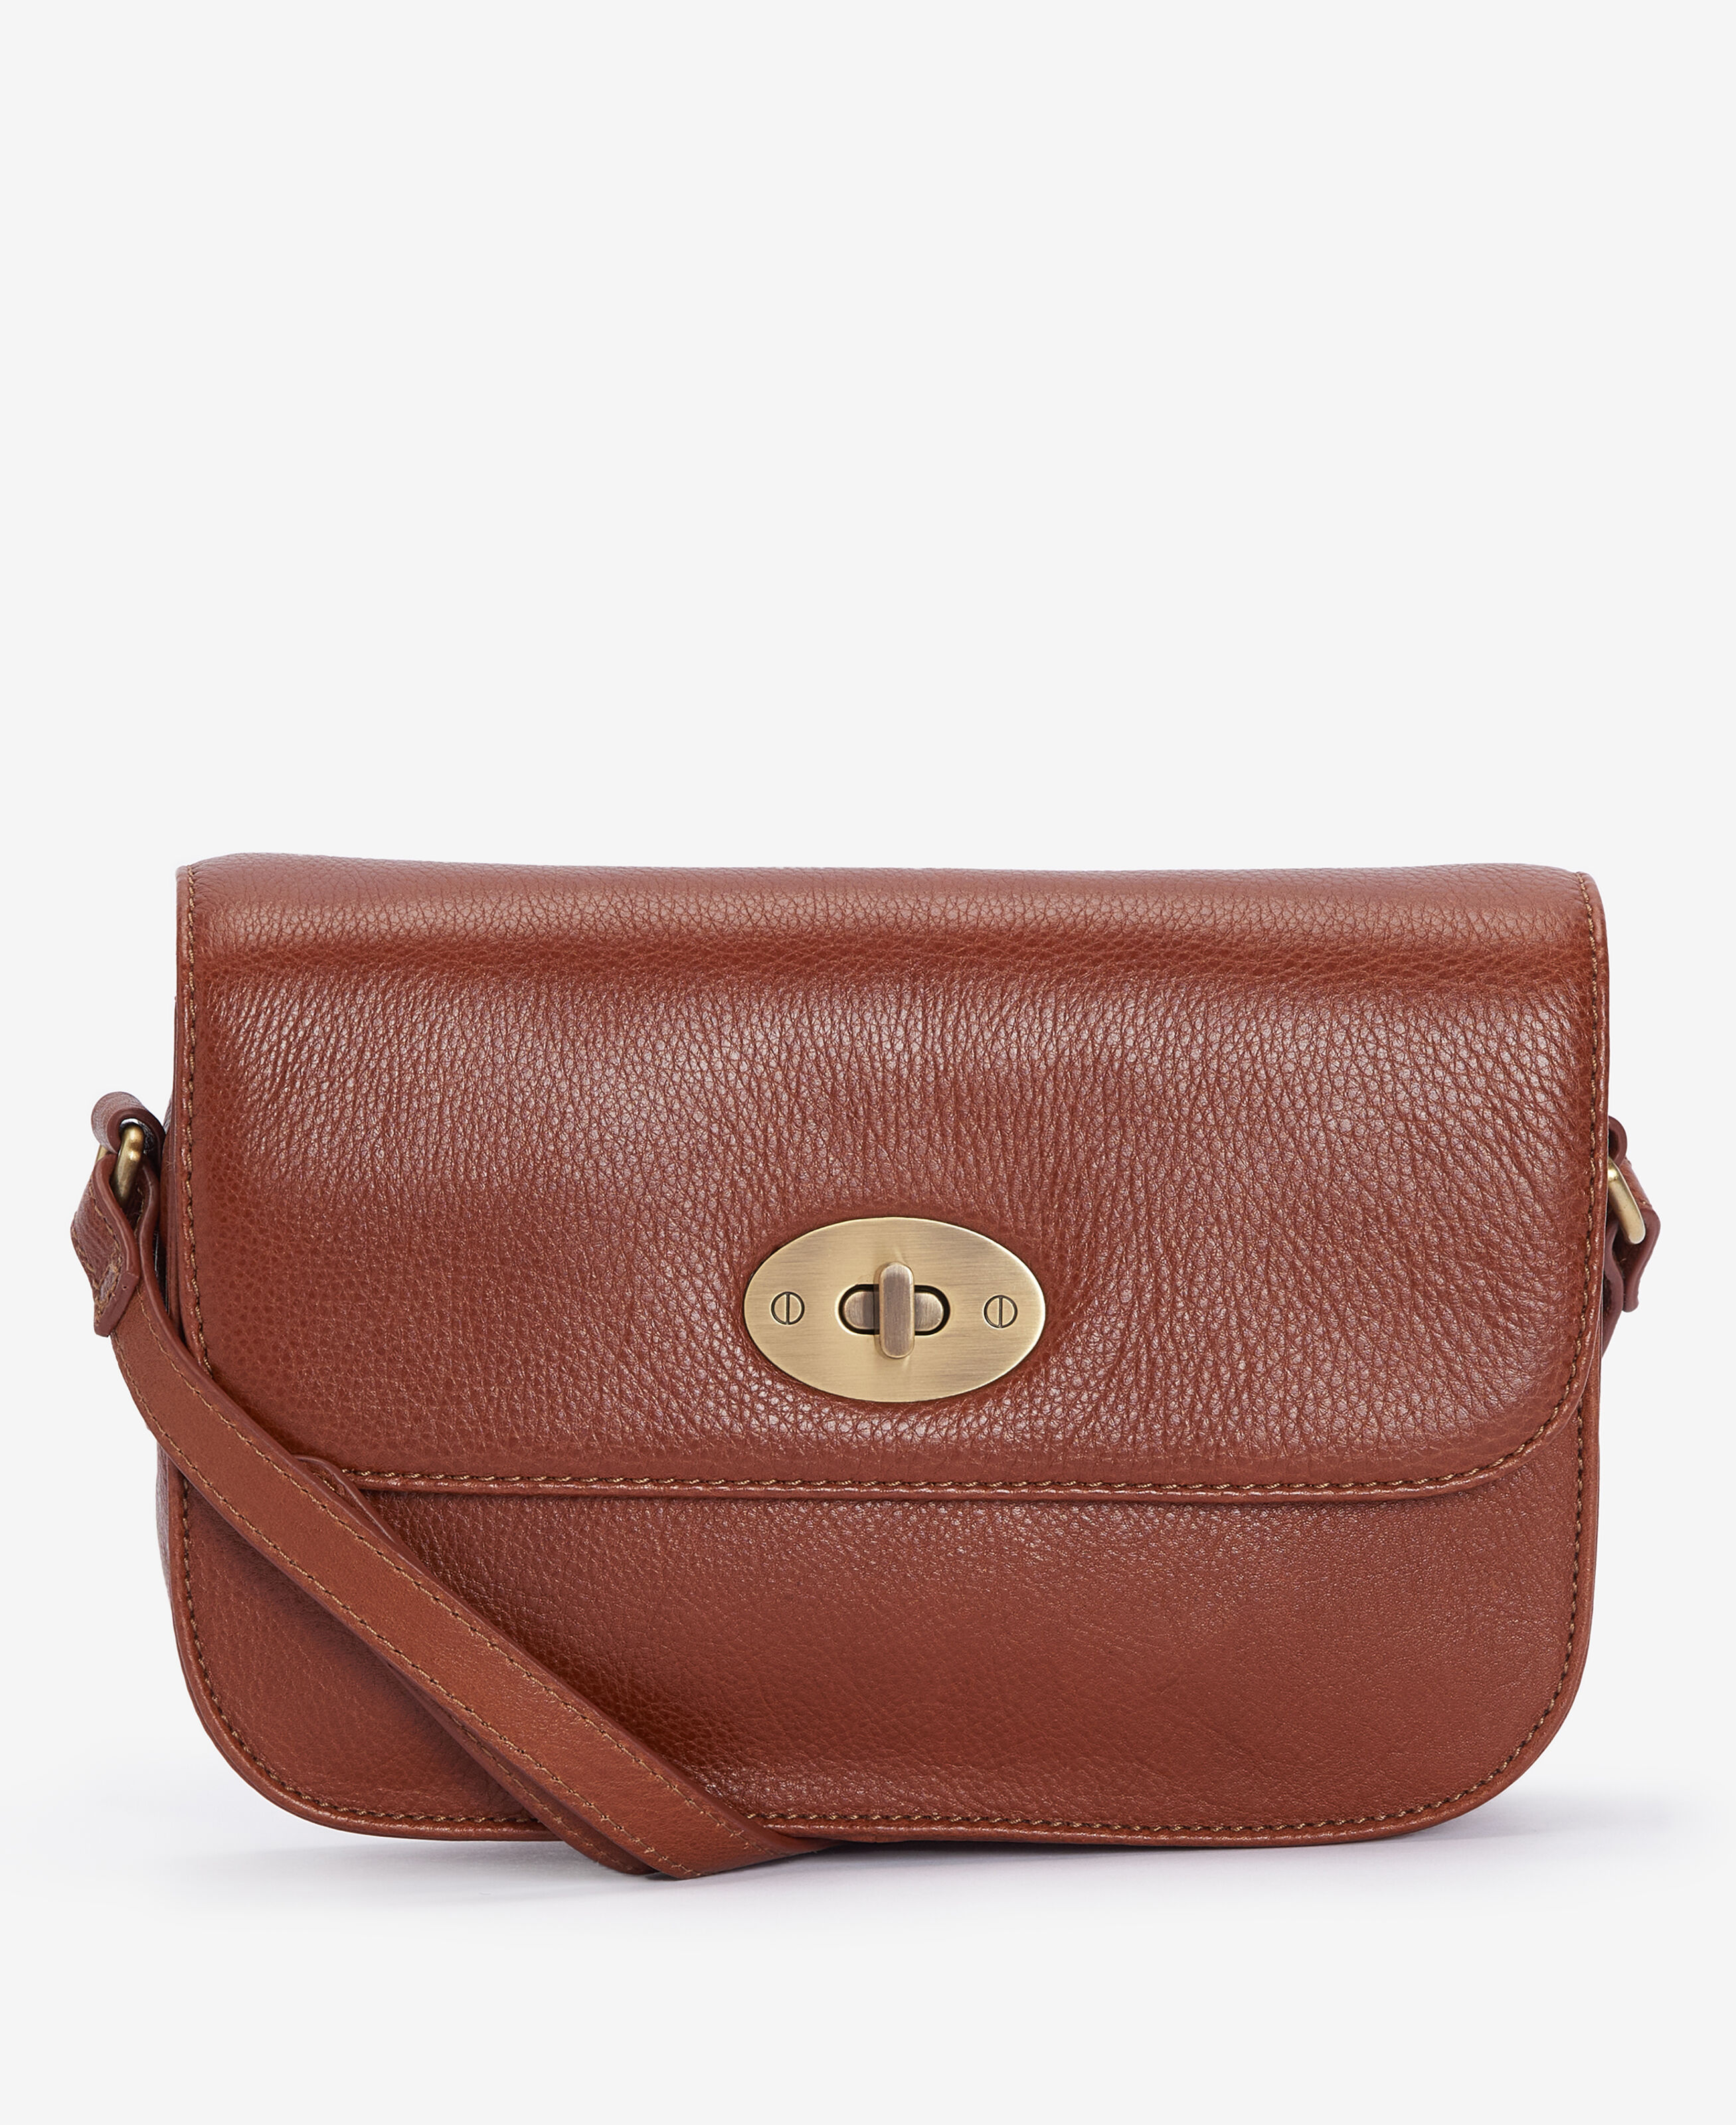 Mulberry locked cosmetic purse in chocolate Brown.